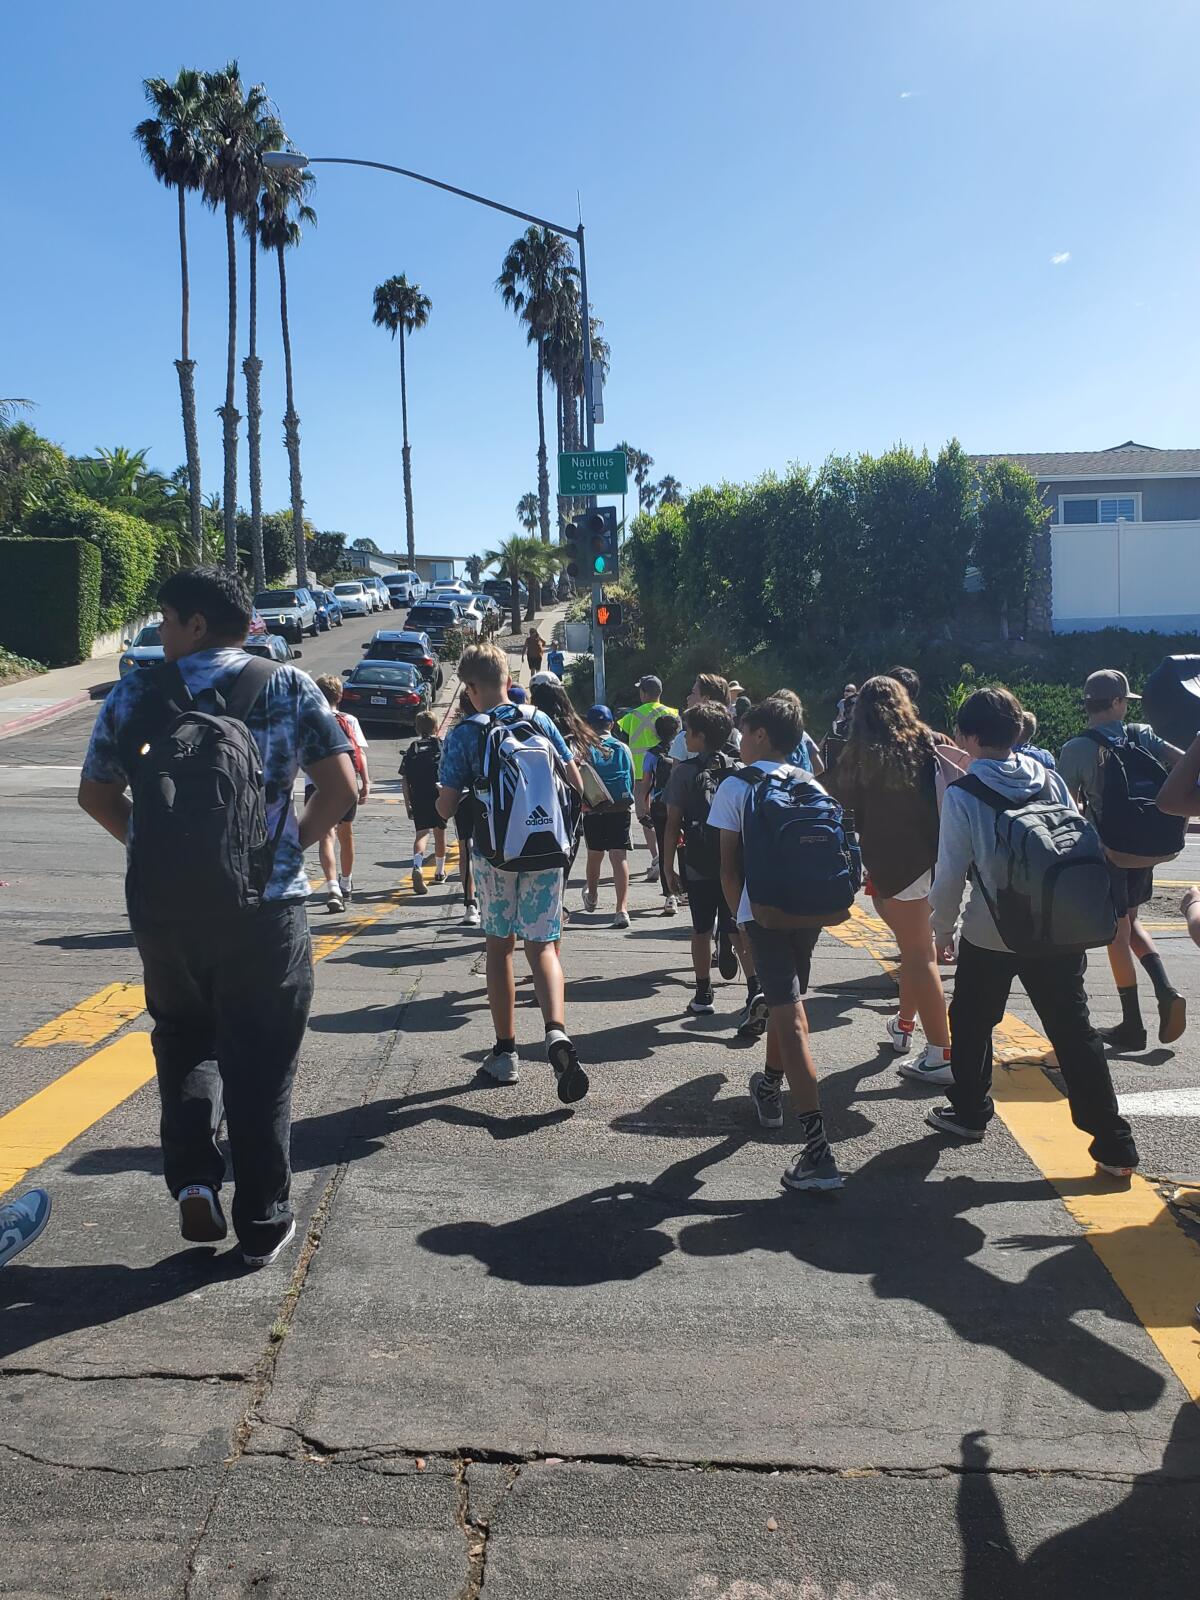 Students cross Nautilus Street at the end of a school day.